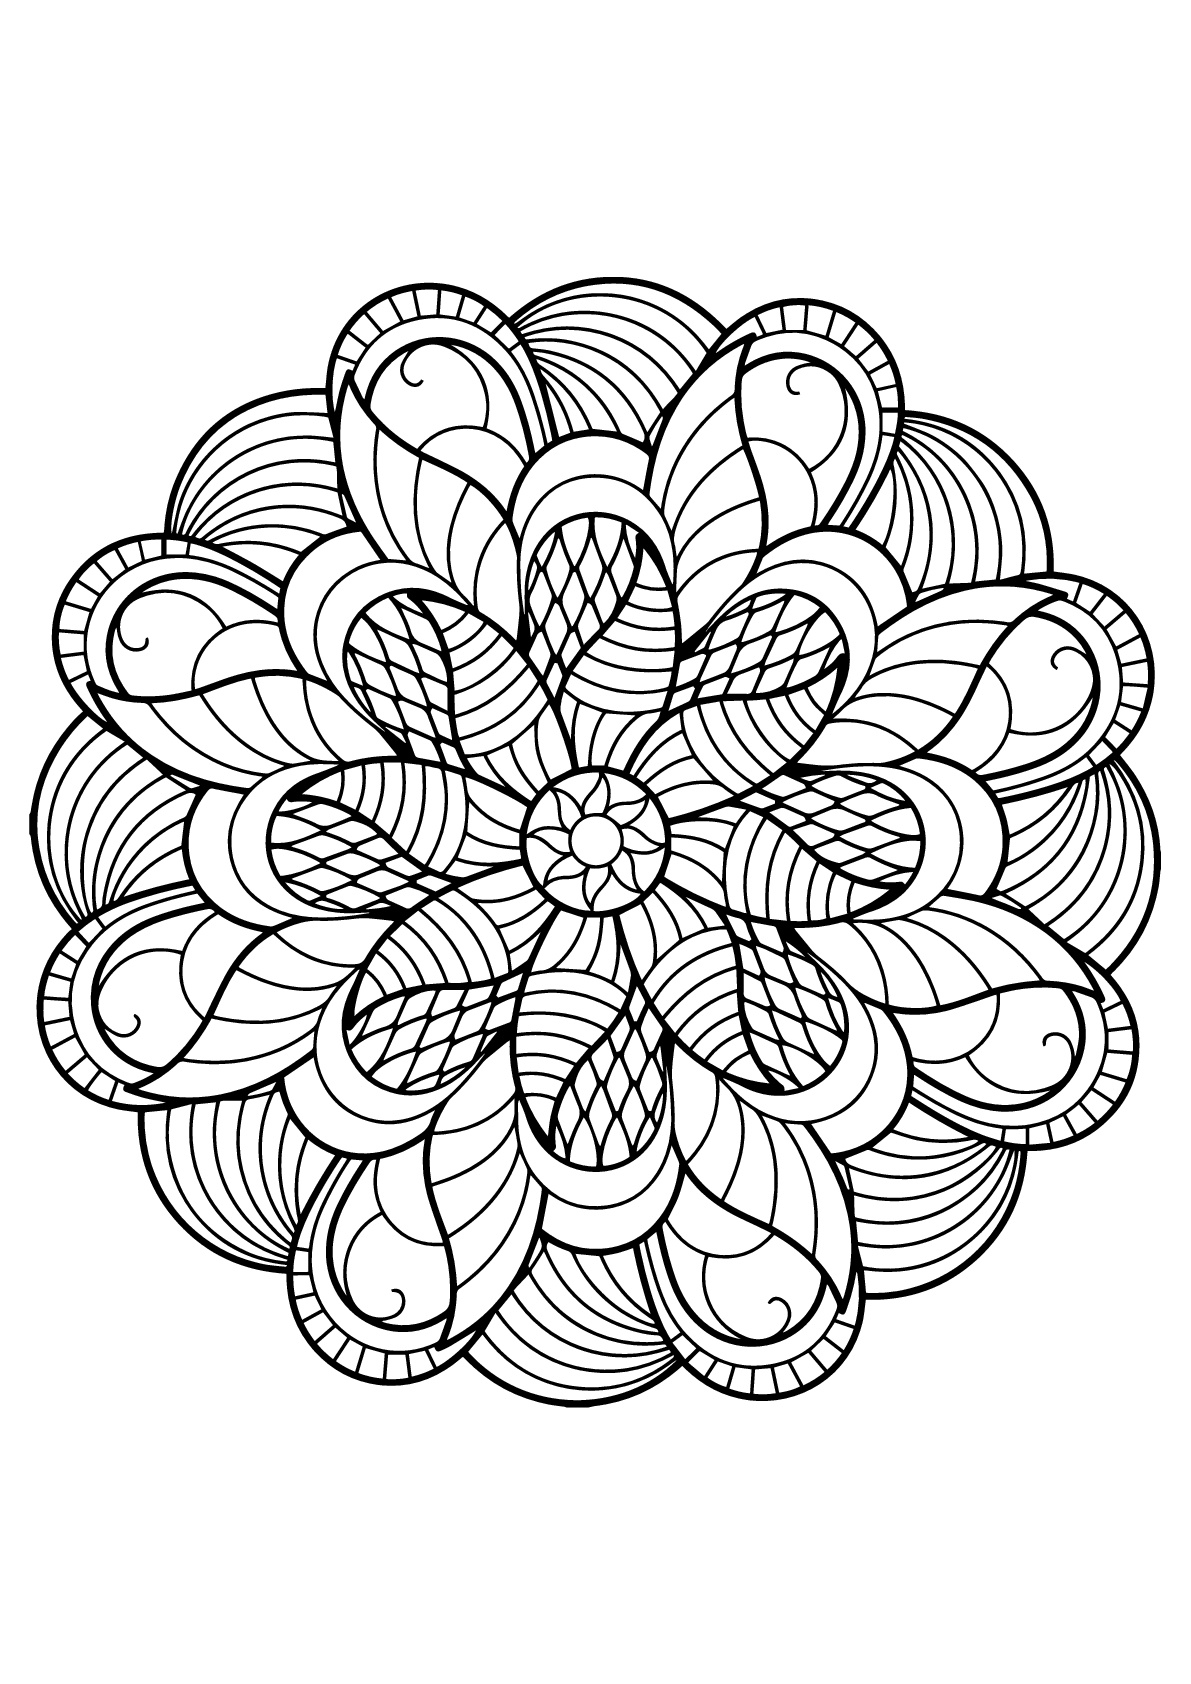 Download Mandala from free coloring books for adults 6 - Mandalas Adult Coloring Pages